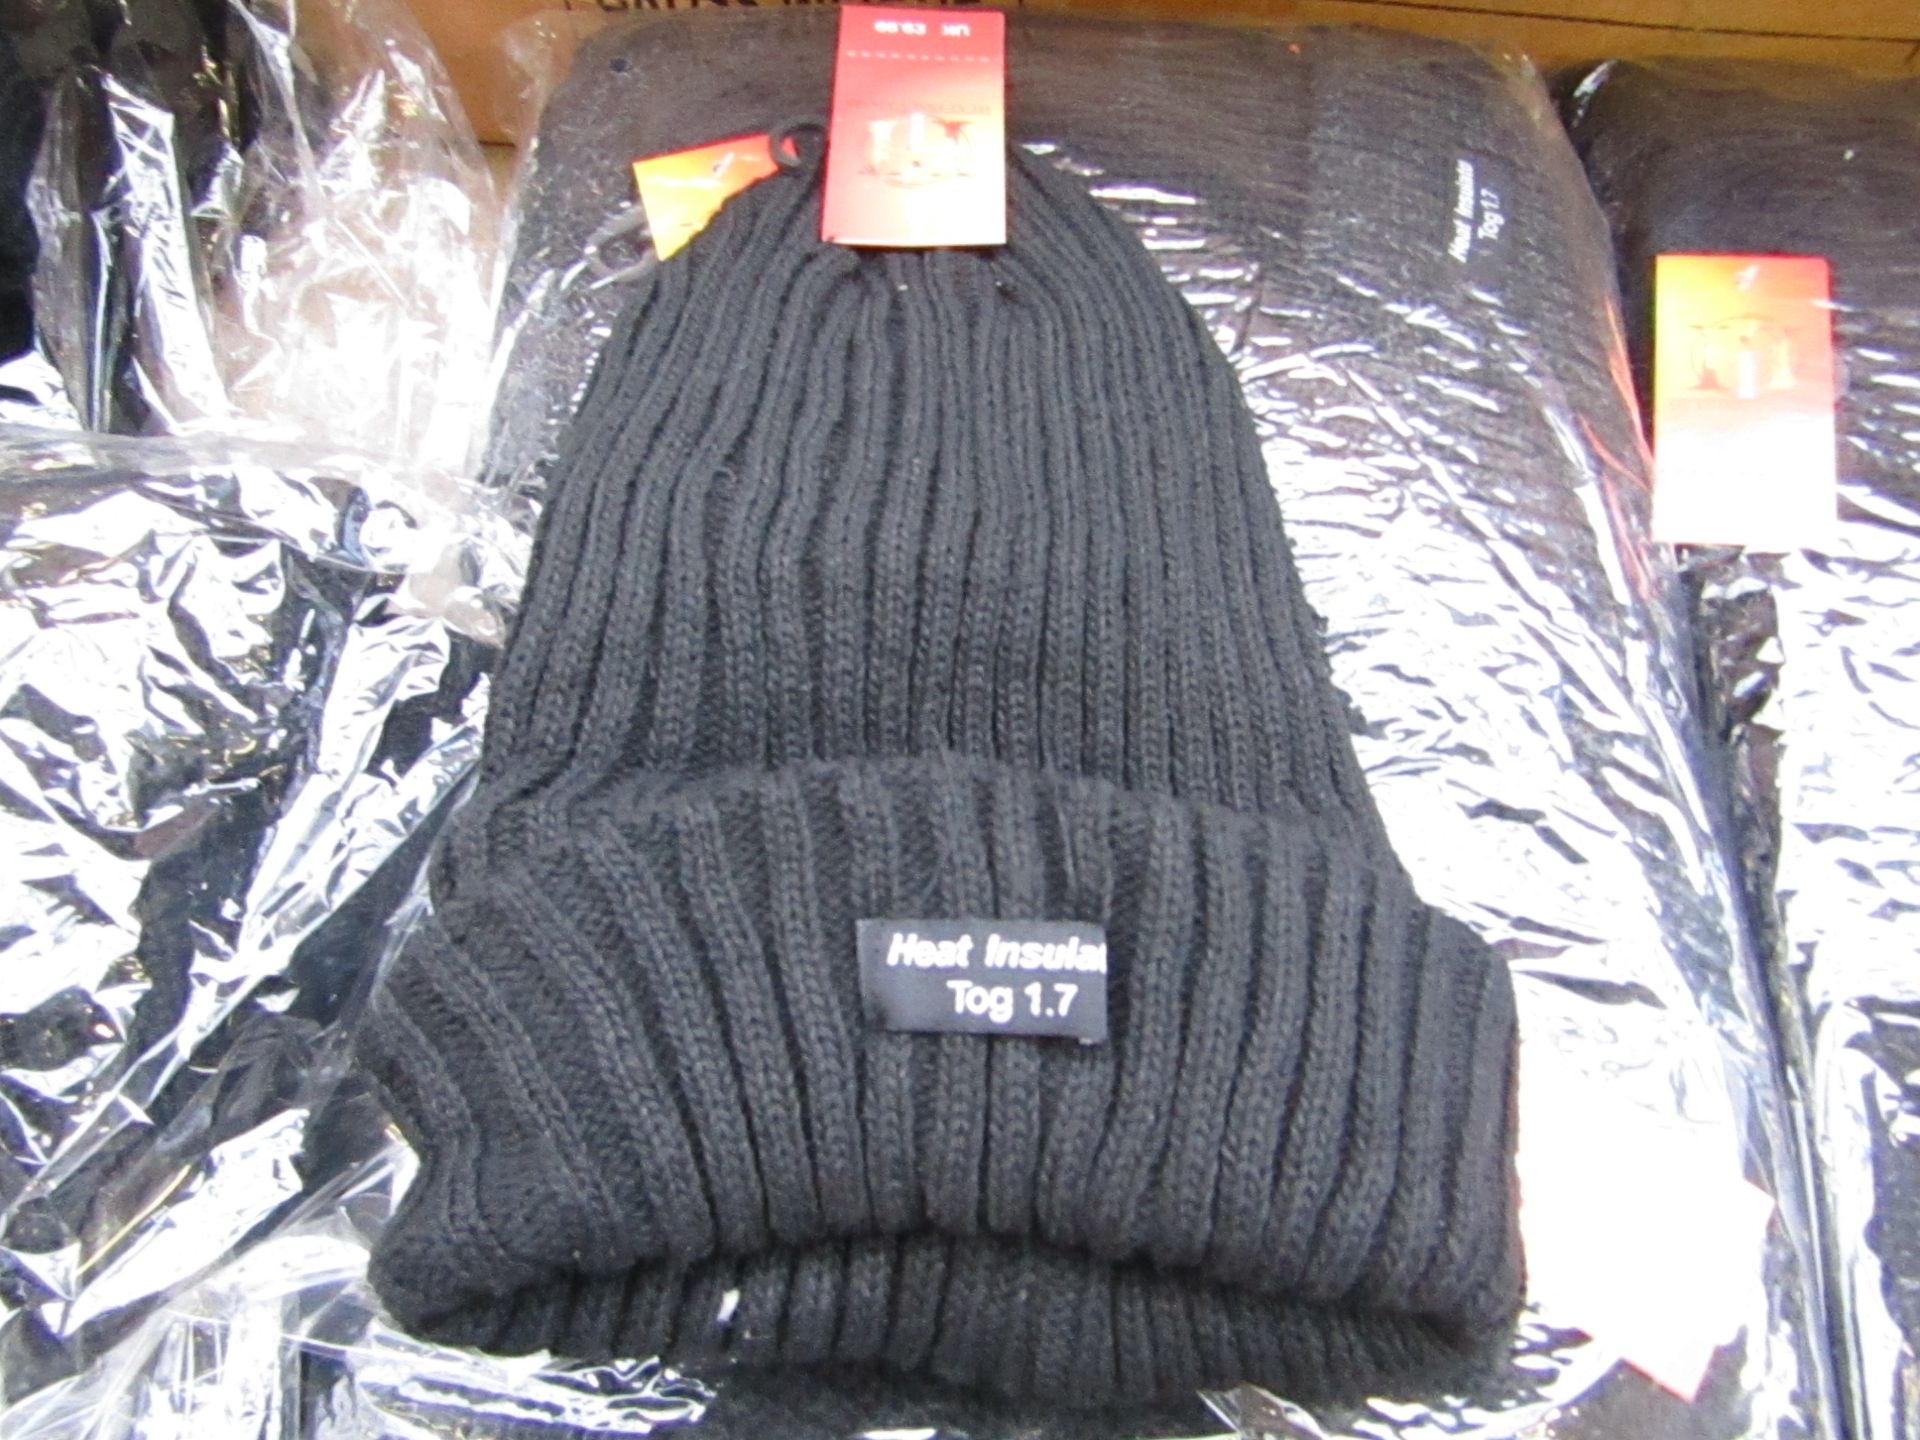 Pack of 12x thermal beanies 1.7 Tog, new and packaged.